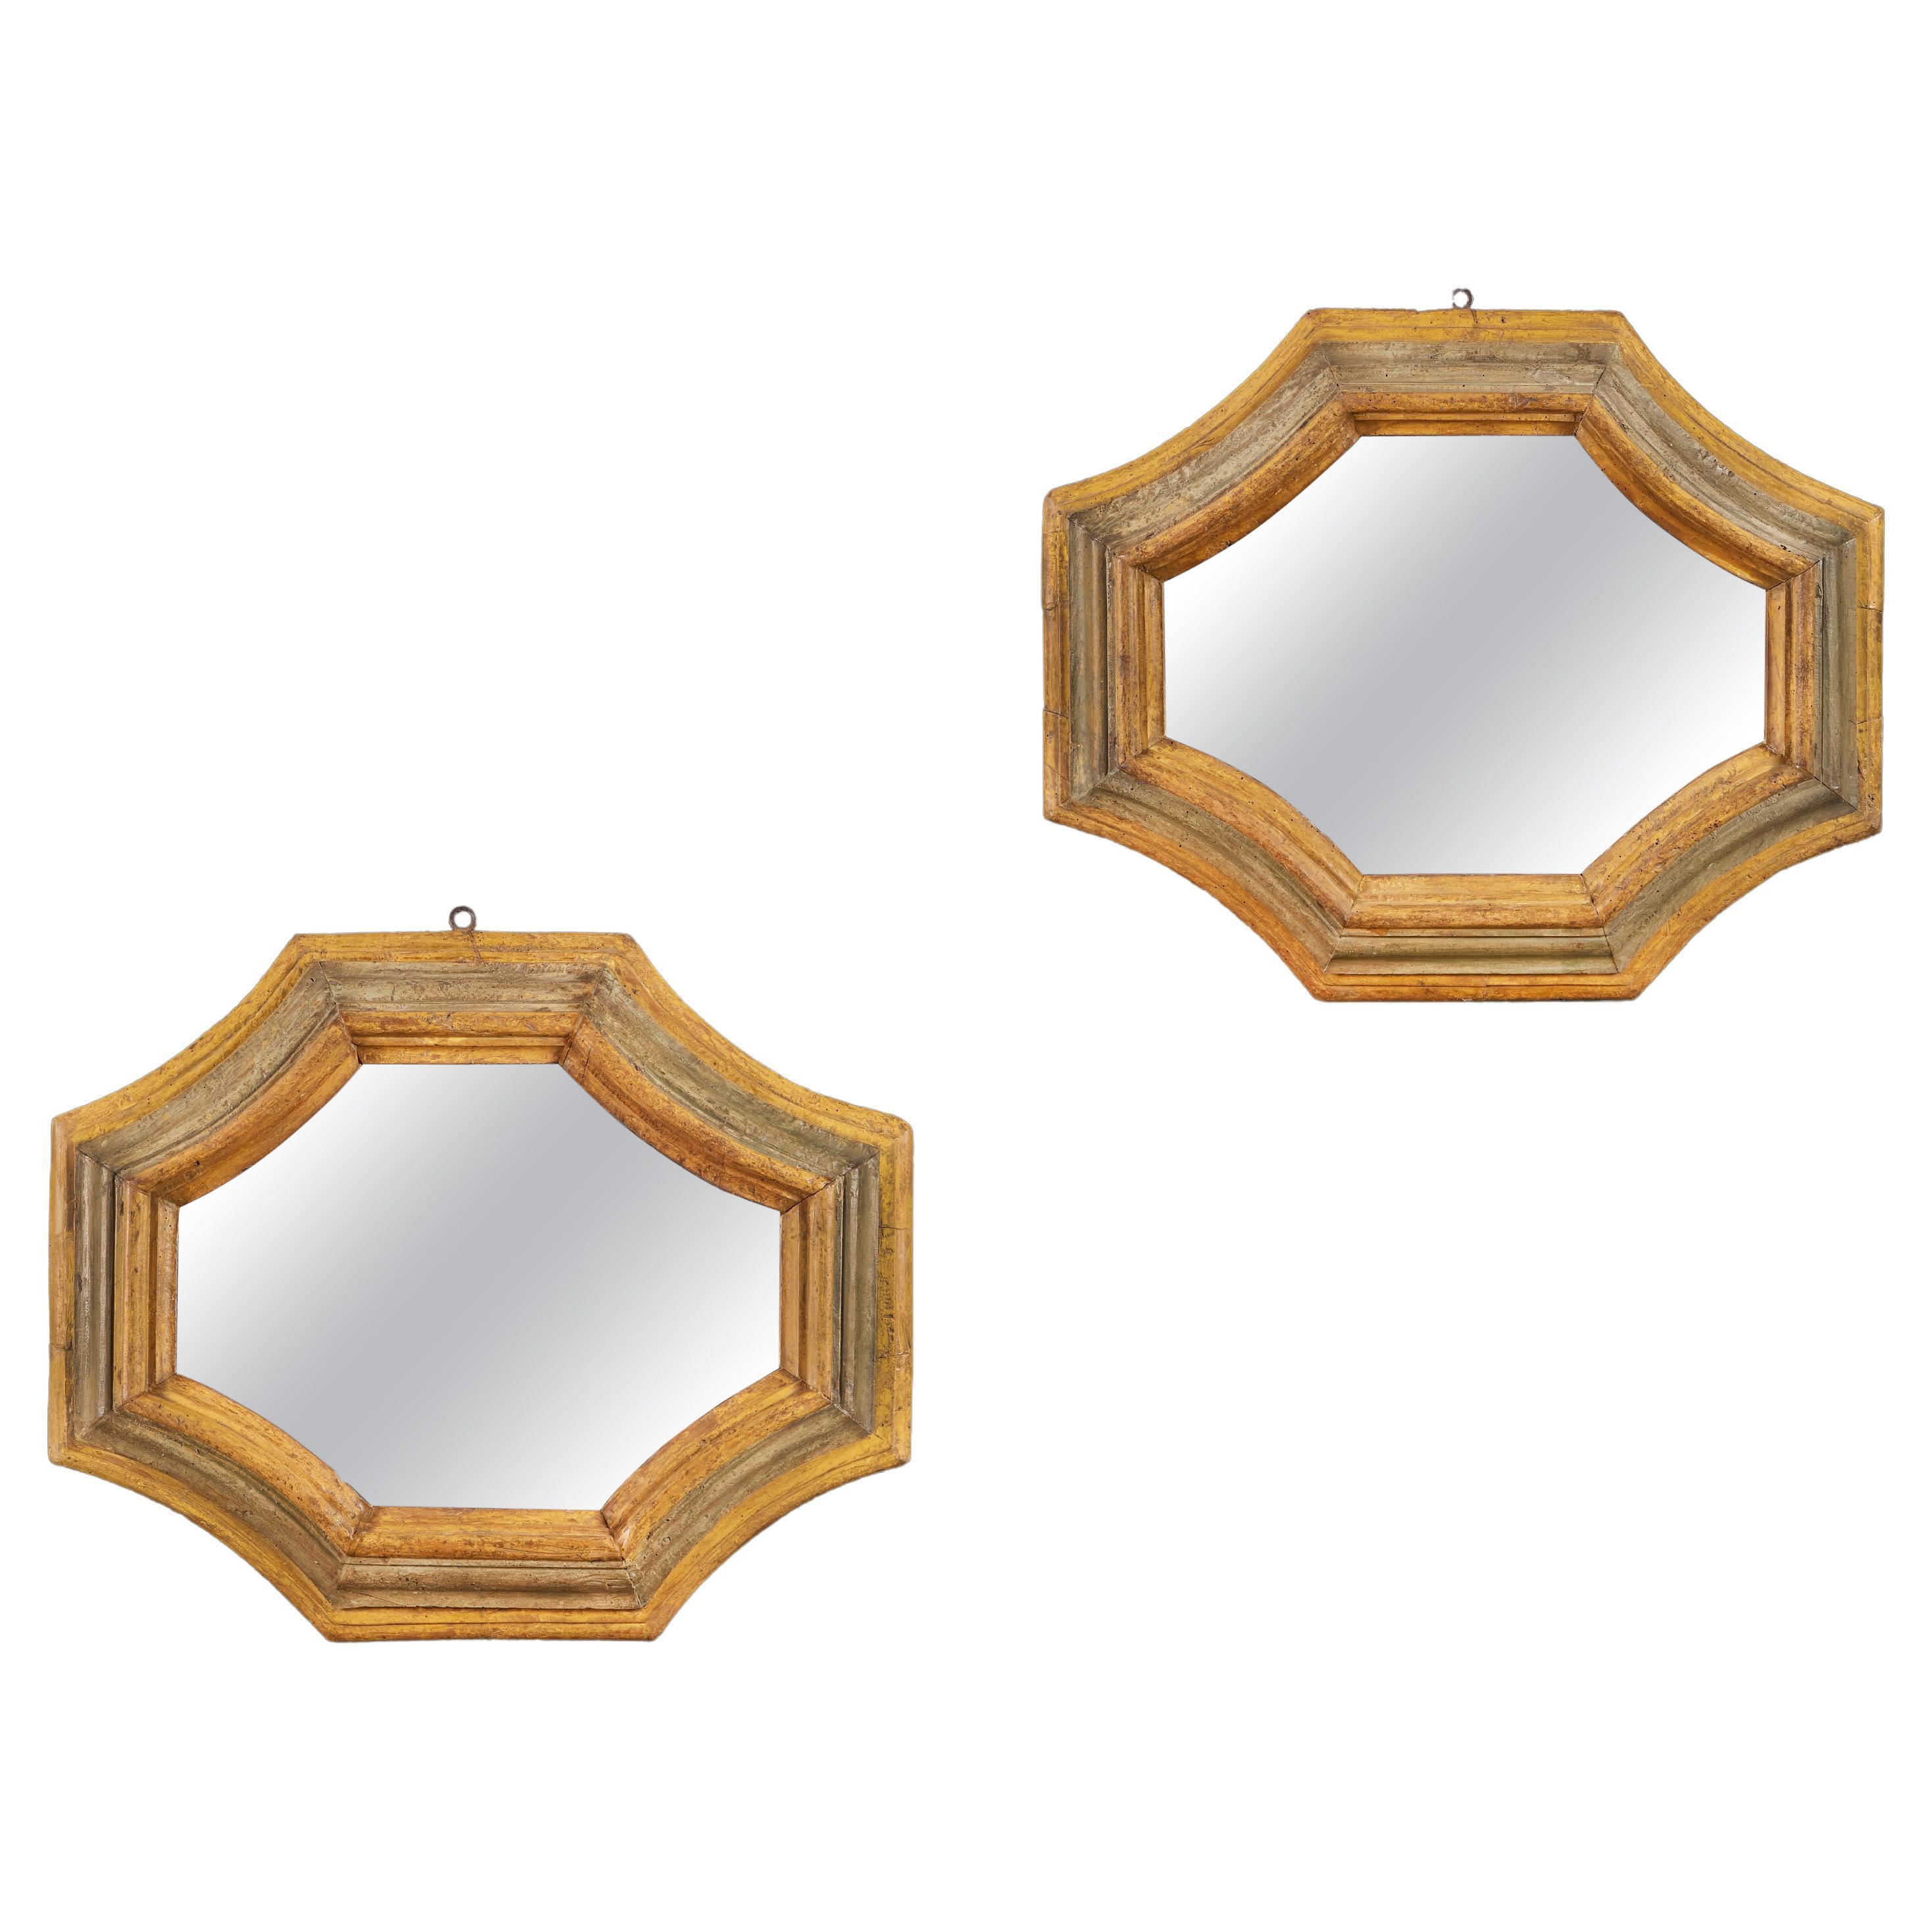 An Unusual Pair of 18th Century Tuscan Octagonal Mirrors For Sale